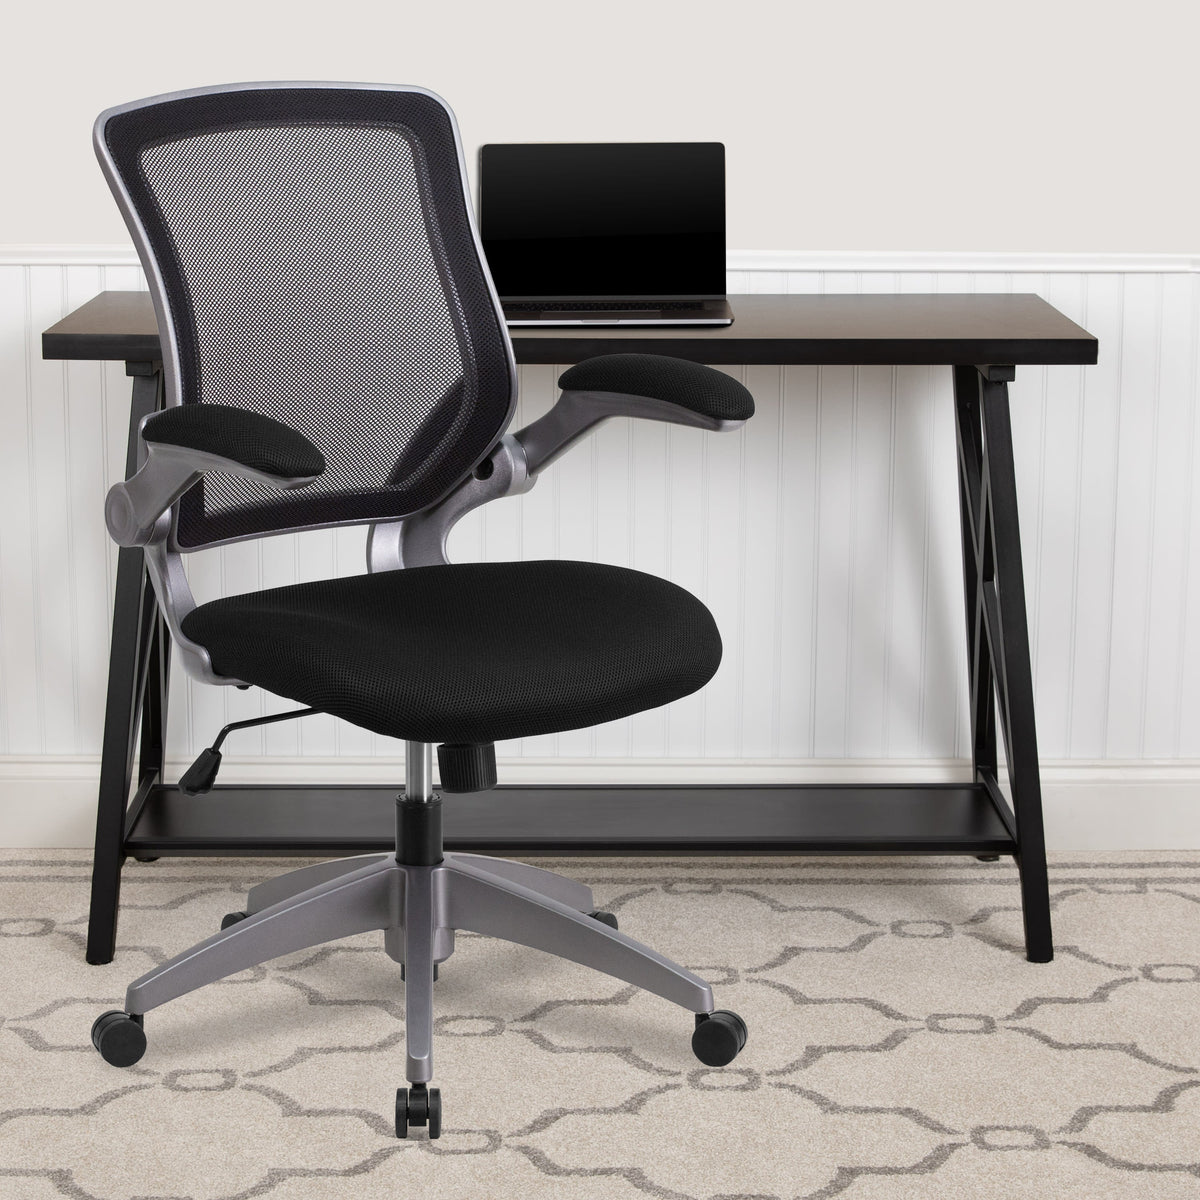 Black |#| Mid-Back Black Mesh Ergonomic Task Office Chair with Gray Frame and Flip-Up Arms